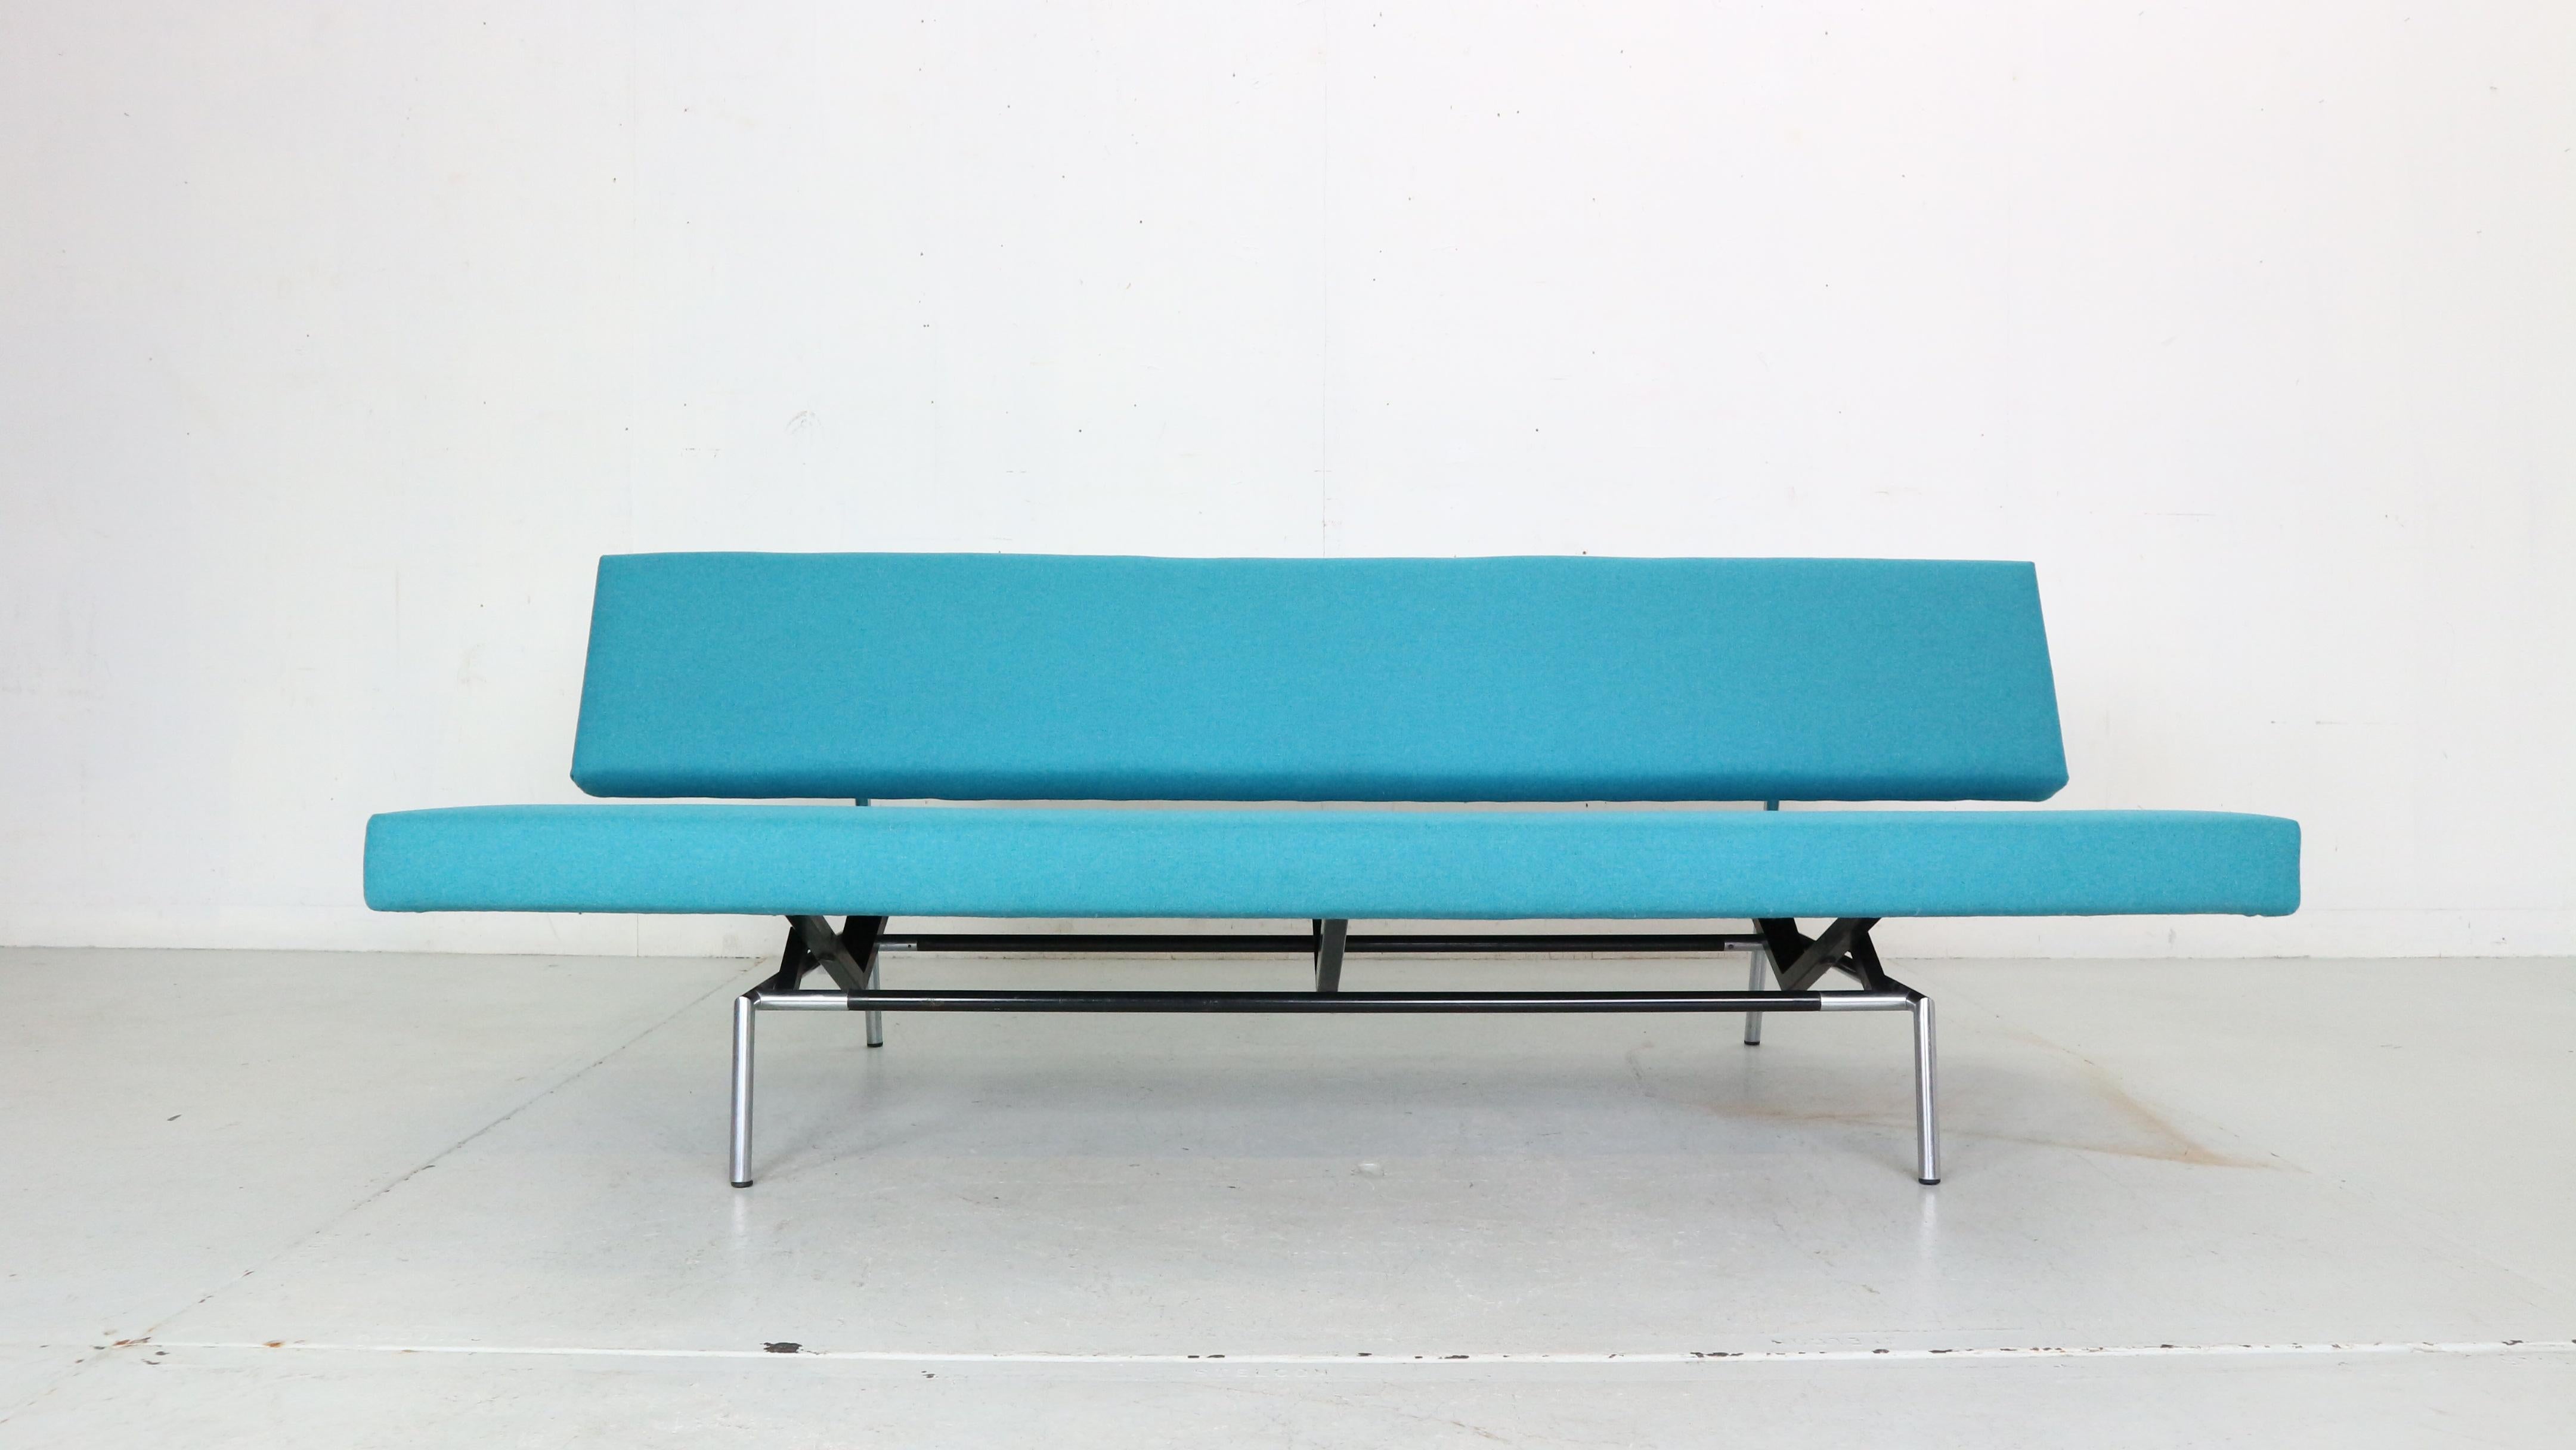 Minimalistic and timeless iconic Dutch design sofa designed by Martin Visser for t'Spectrum manufacture in 1960s period, Netherlands.
Model number- BZ53.
Original chrome and black lacquered metal frame with newly upholstered in blue colour